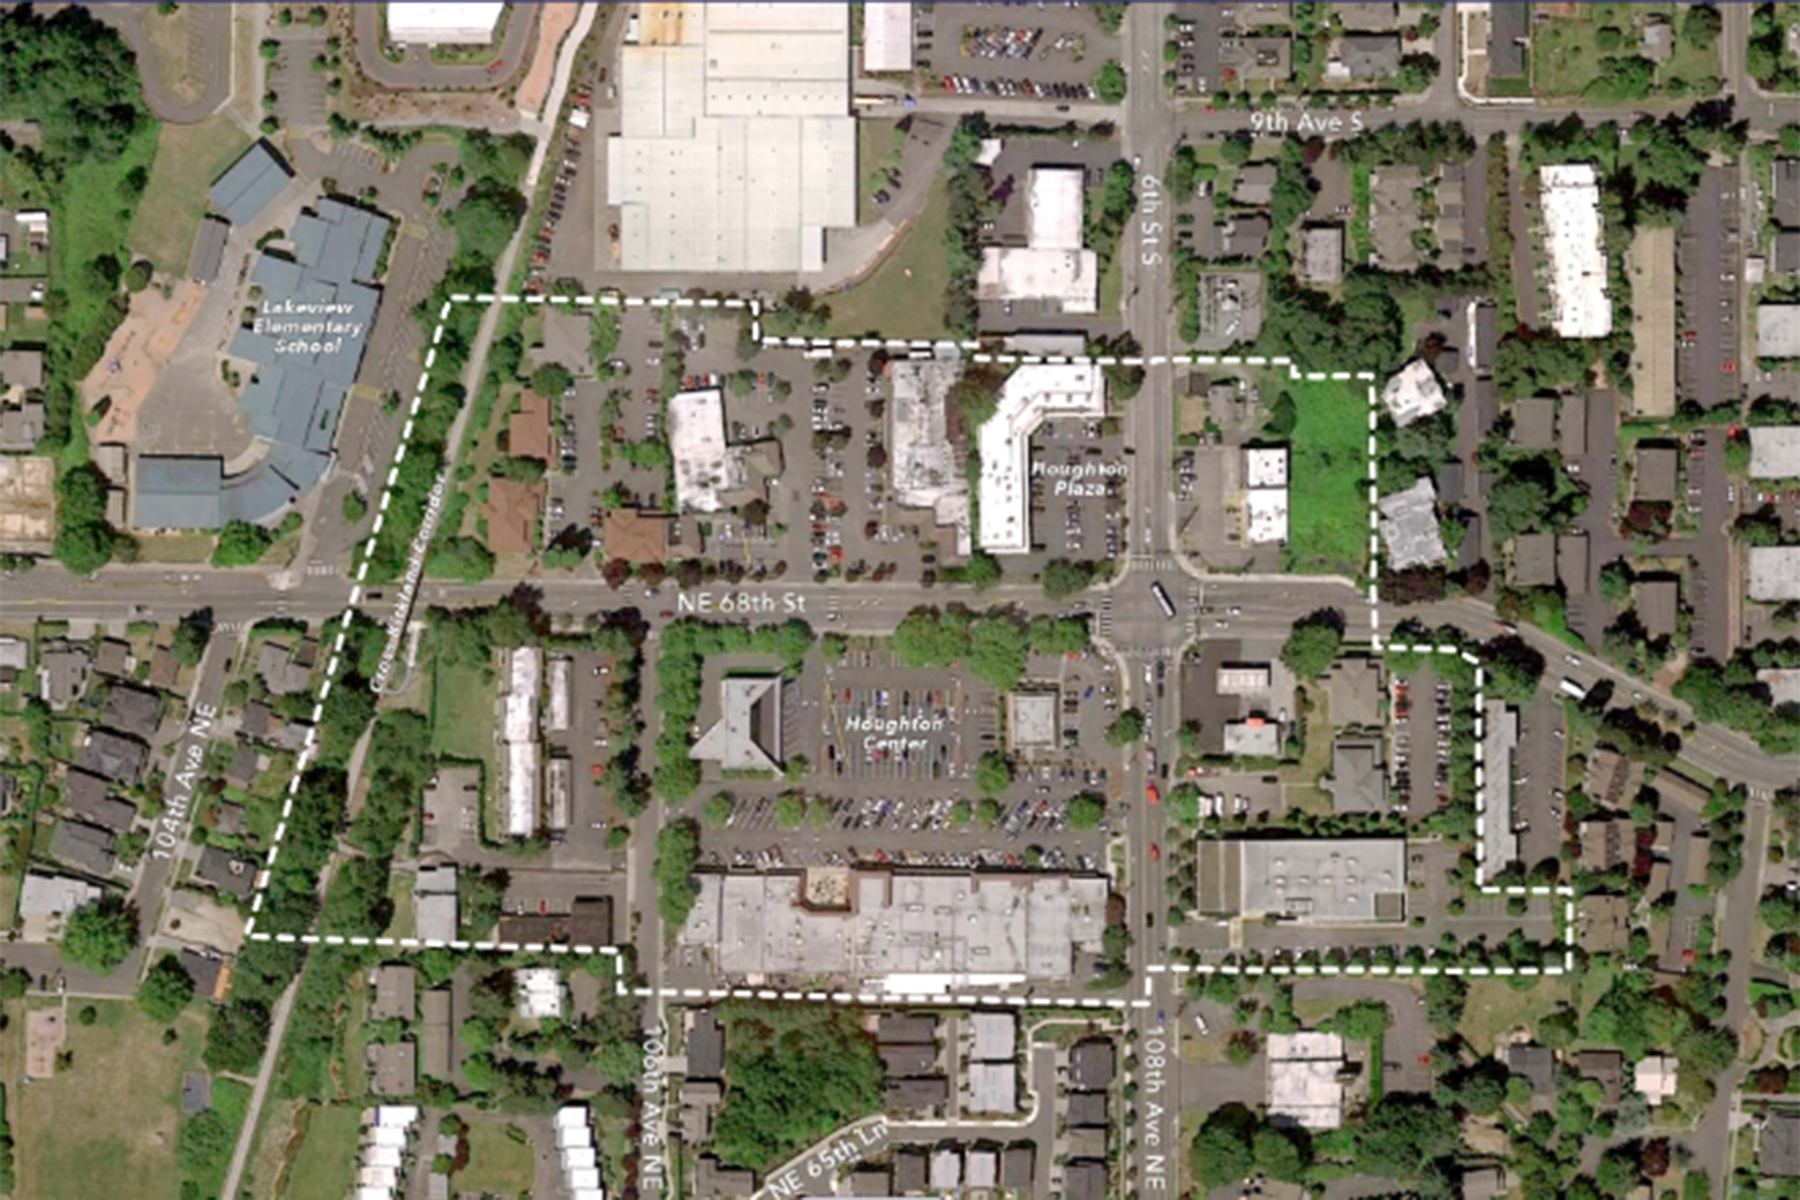 A map provided by the City of Kirkland shows the Houghton Everest Neighborhood Center, the area being examined by the city (inside the dashed white line) for possible land use code amendments. Submitted art